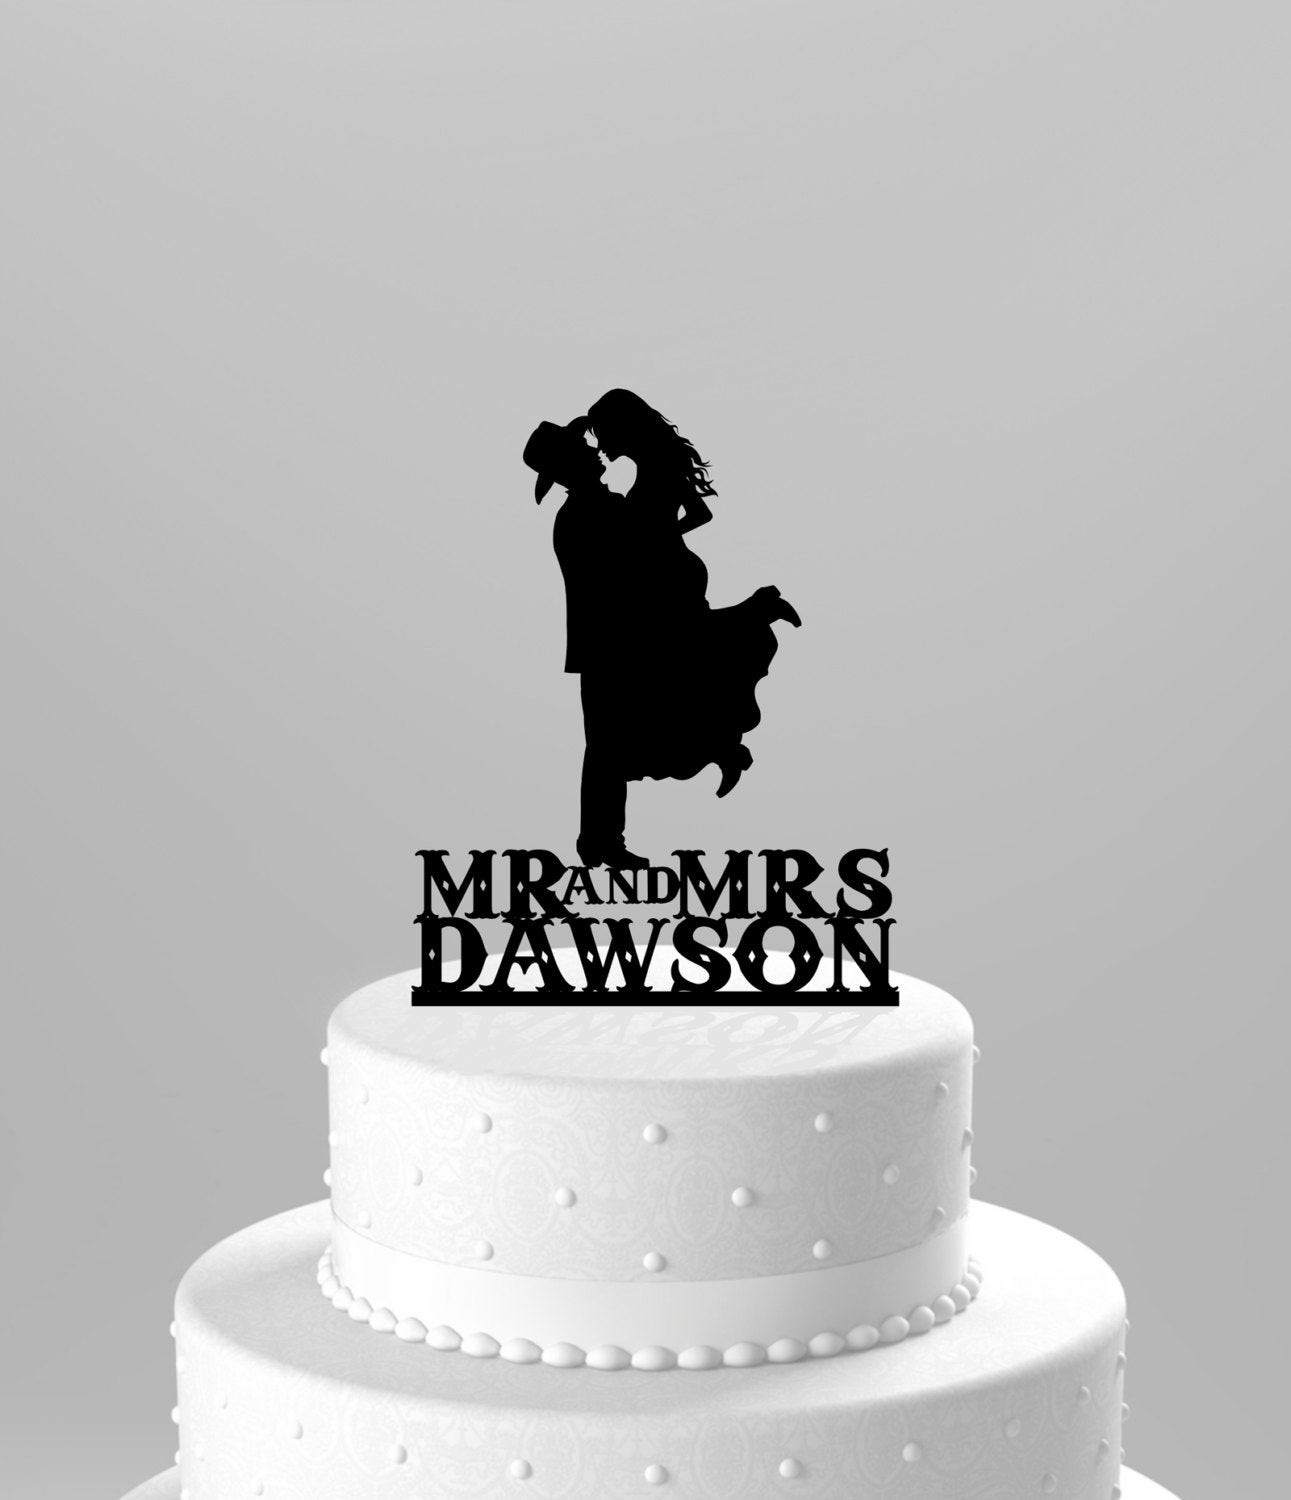 Western Wedding Cake Topper
 Country Western Wedding Cake Topper Silhouette Cowboy with Hat